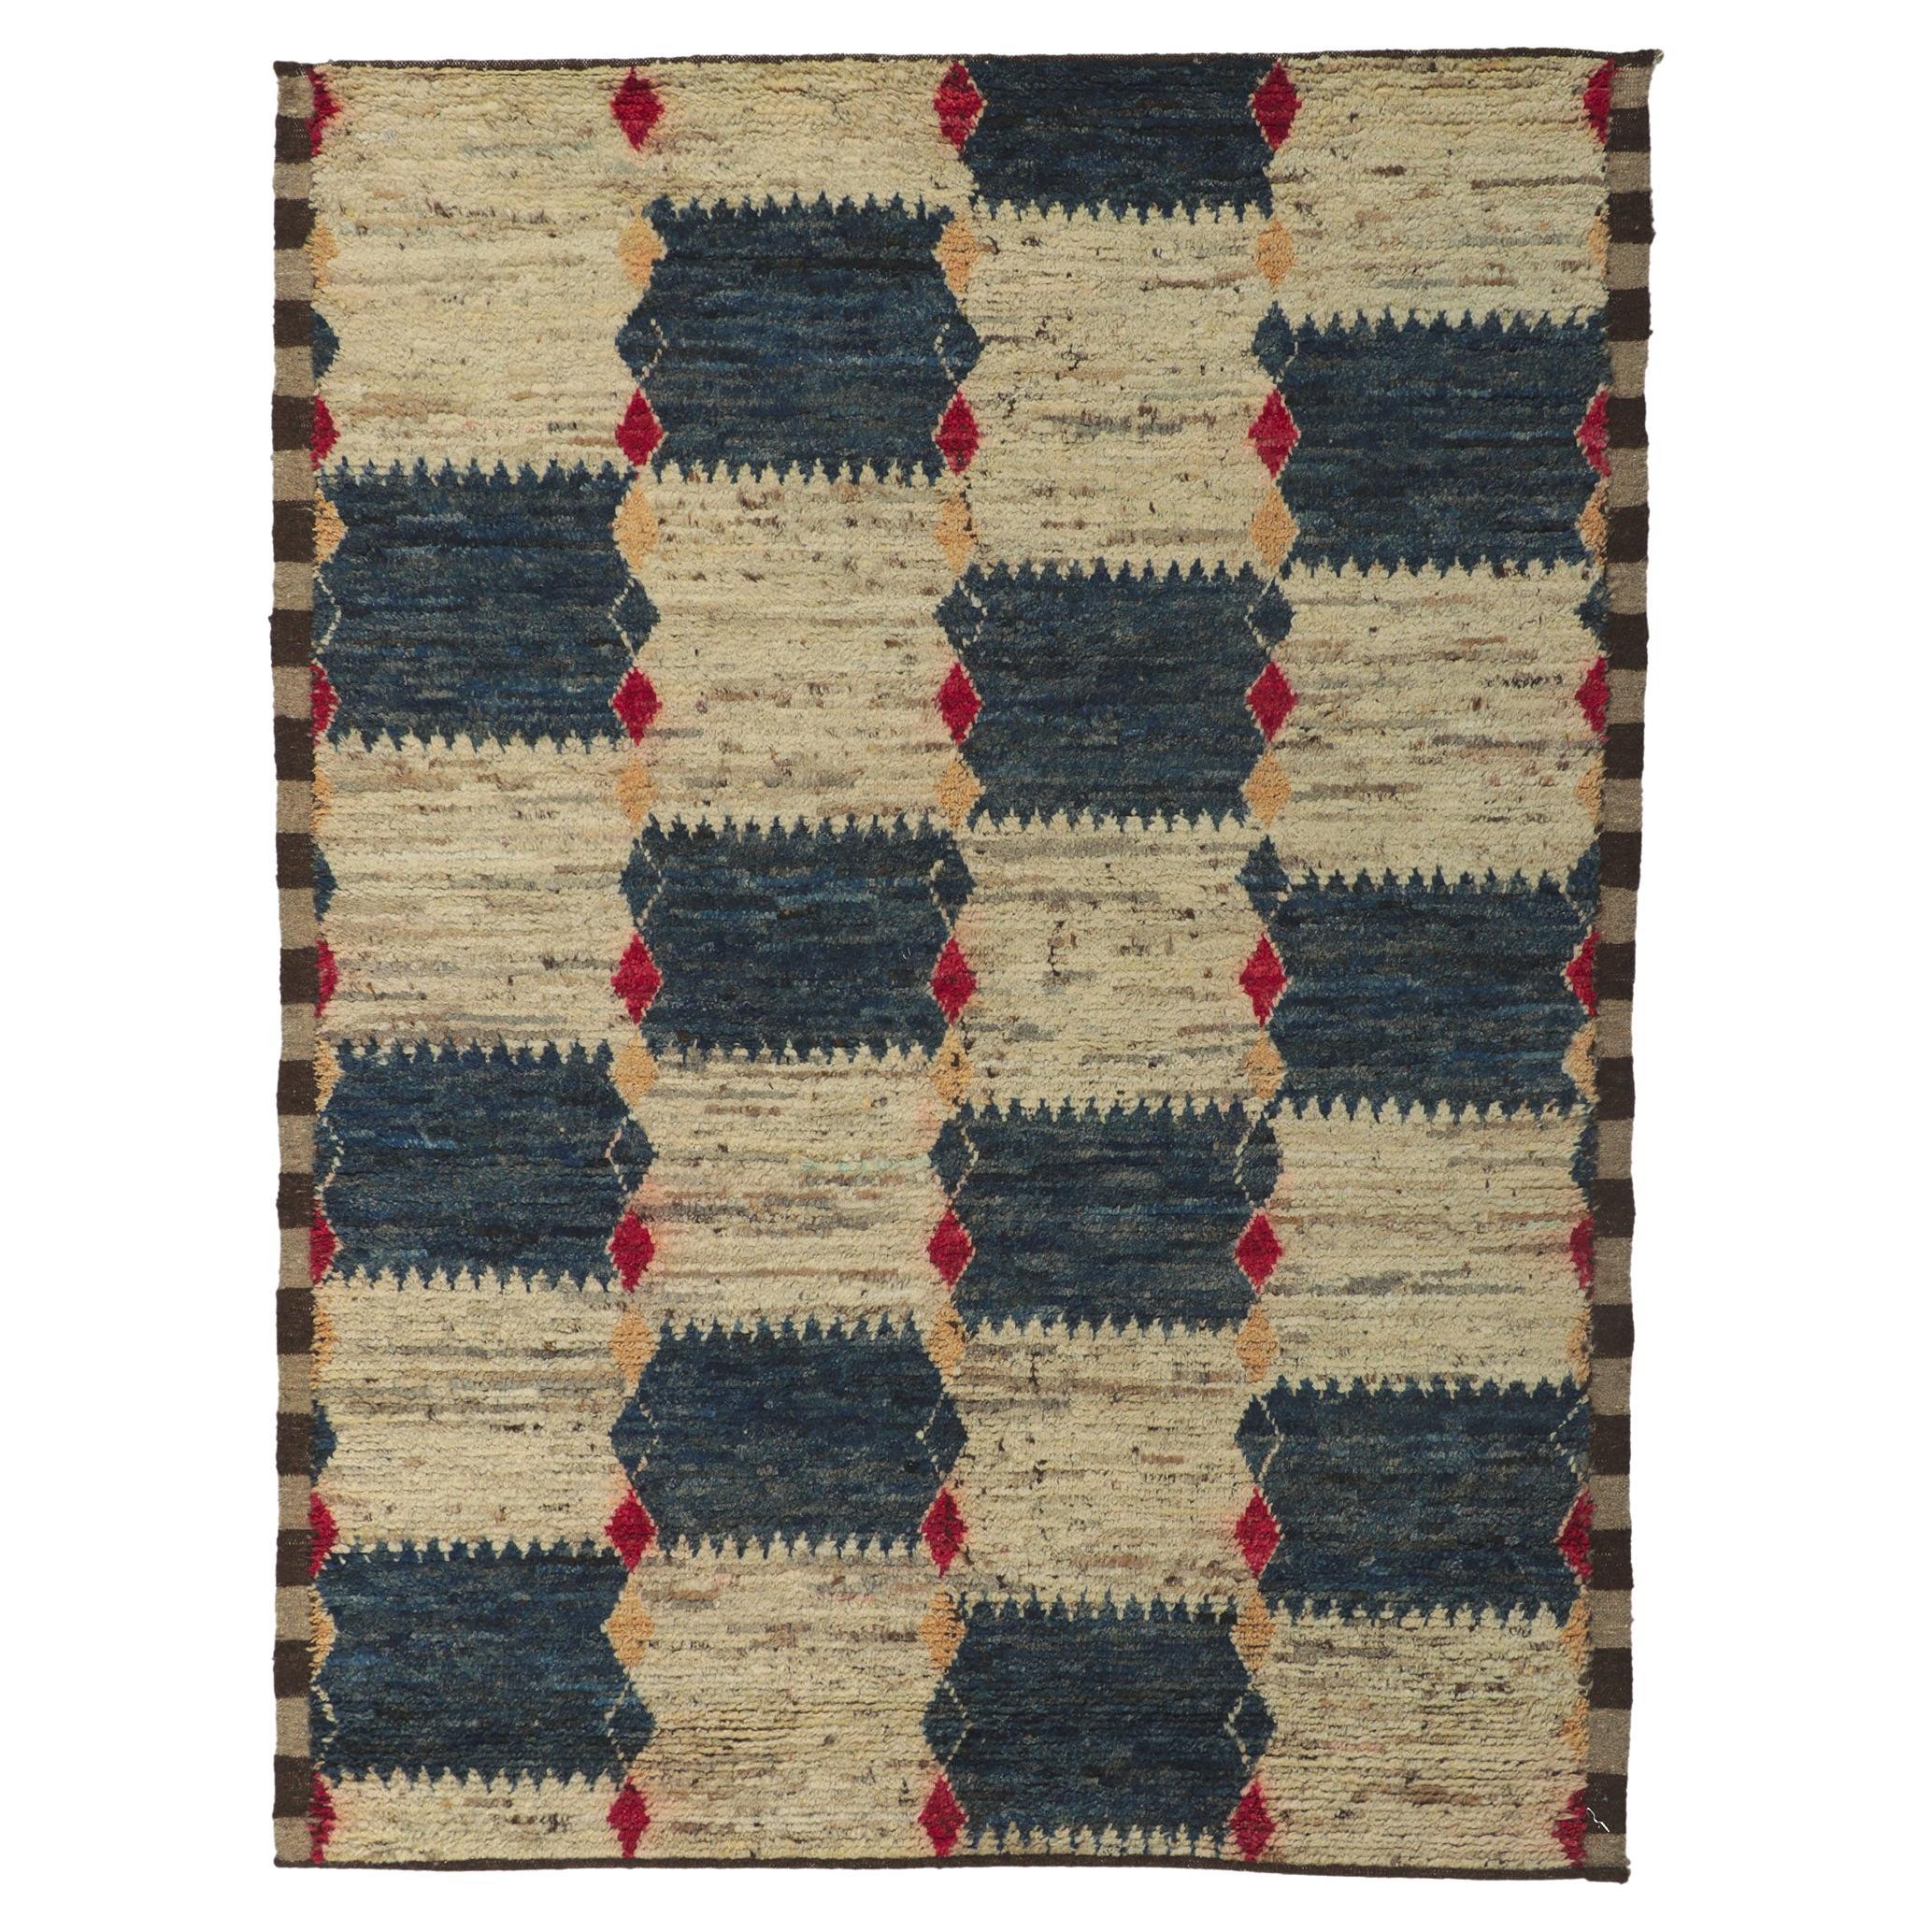 Earth-tone Checkered Moroccan Rug, Midcentury Modern Meets Tribal Enchantment